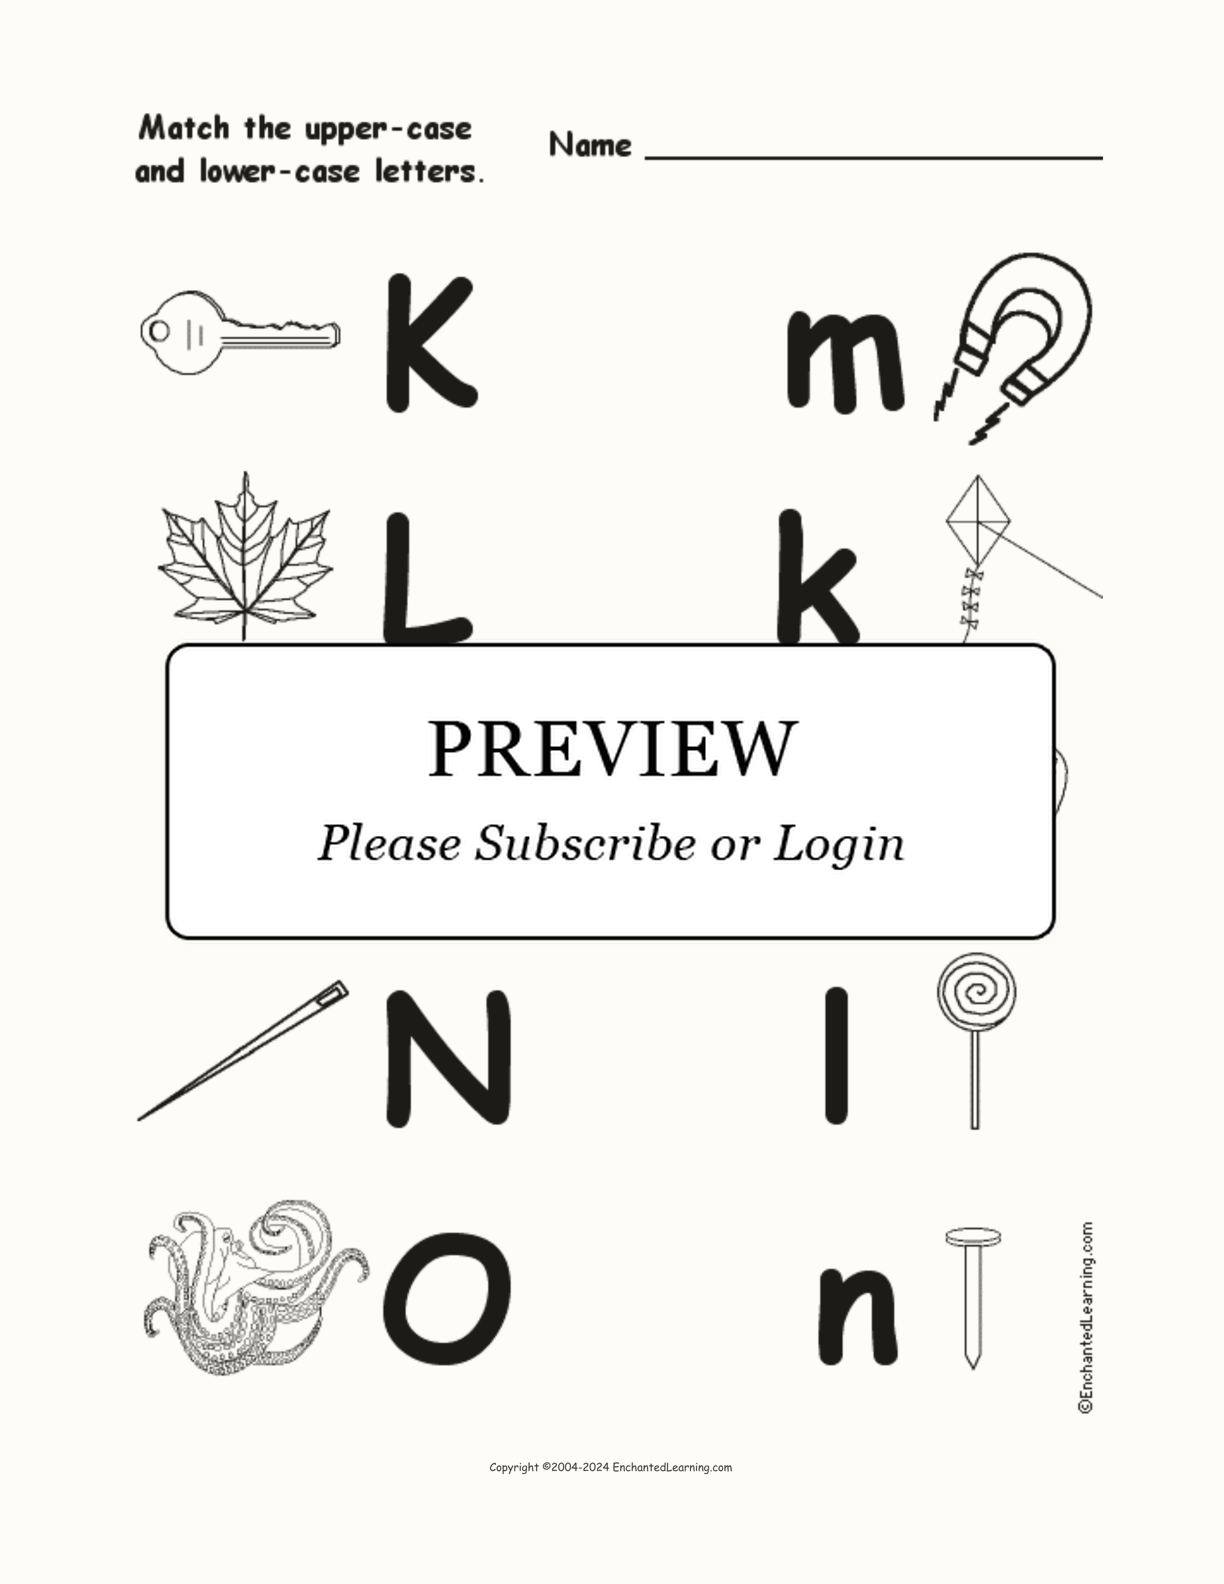 Match Uppercase and Lowercase Letters K-O interactive worksheet page 1